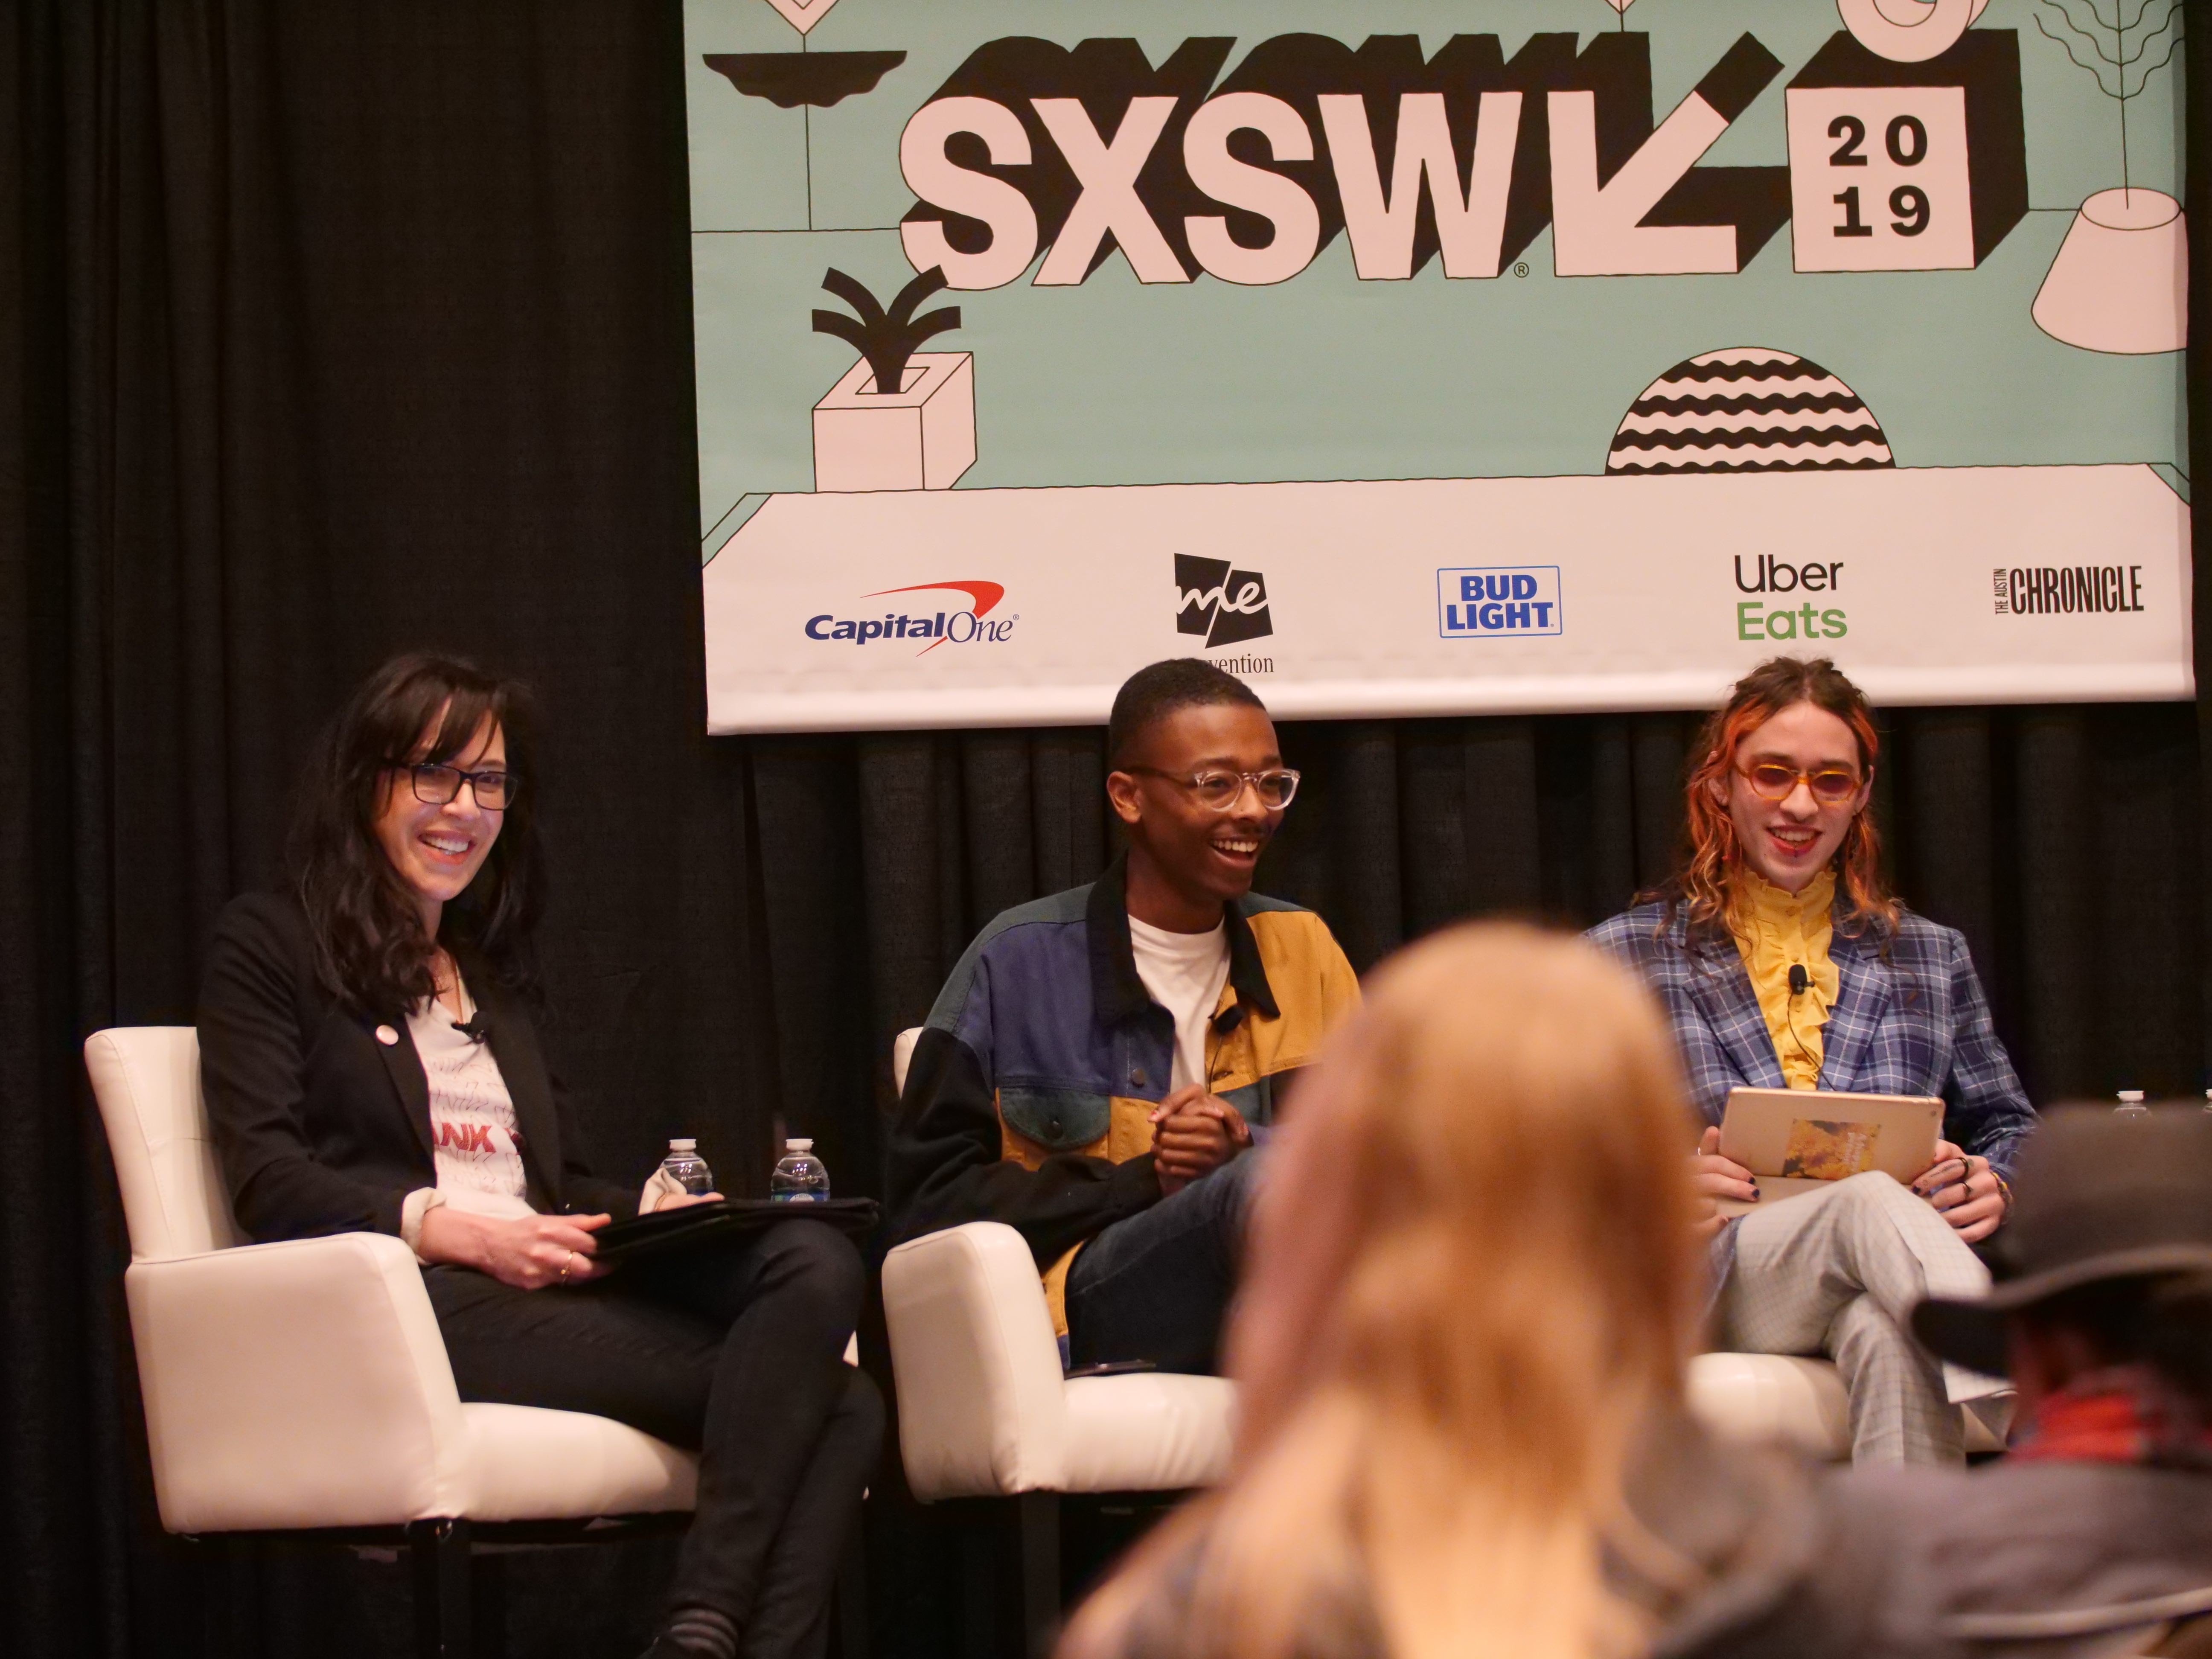 Myles Loftin, Photography '20, in the middle, spoke about the importance of creating better representation of underrepresented people in art and media